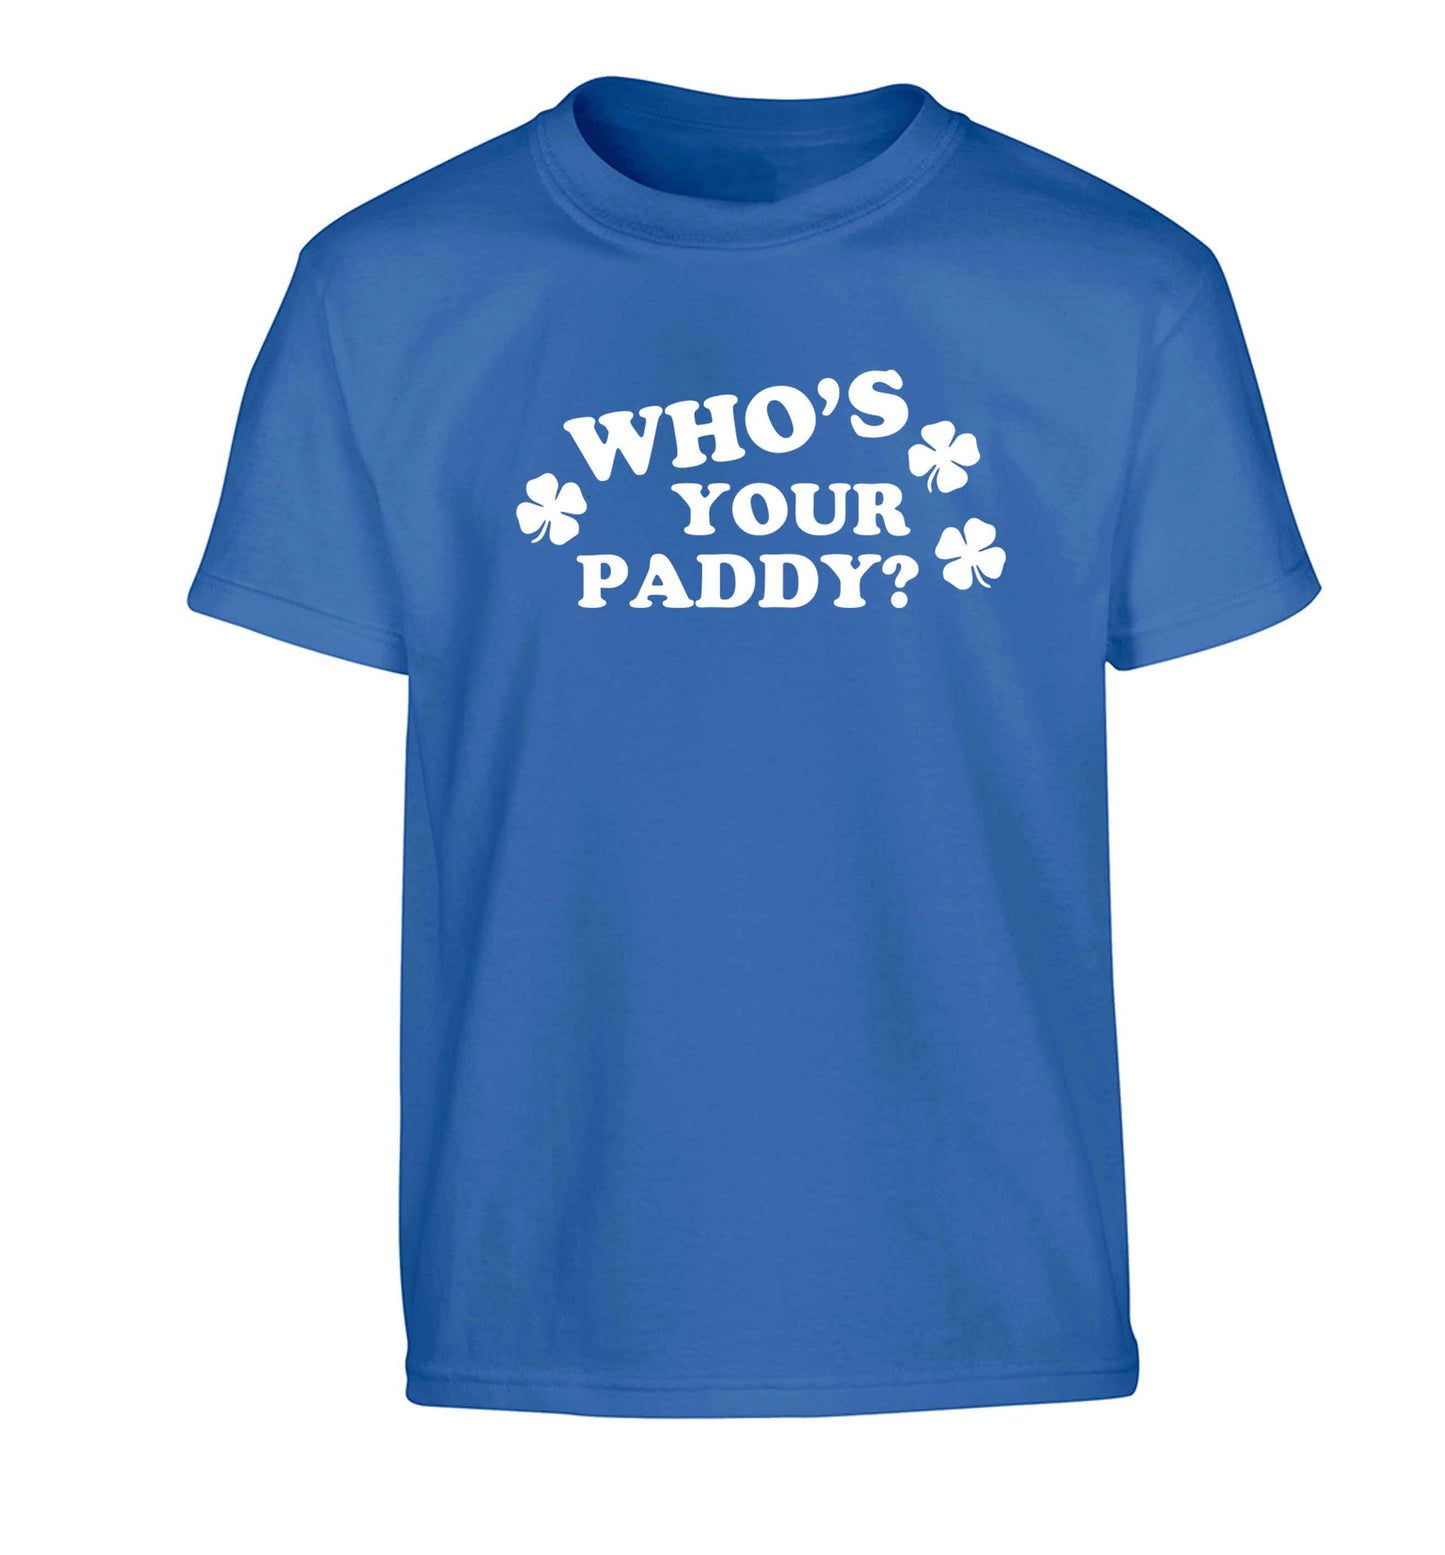 Who's your paddy? Children's blue Tshirt 12-13 Years